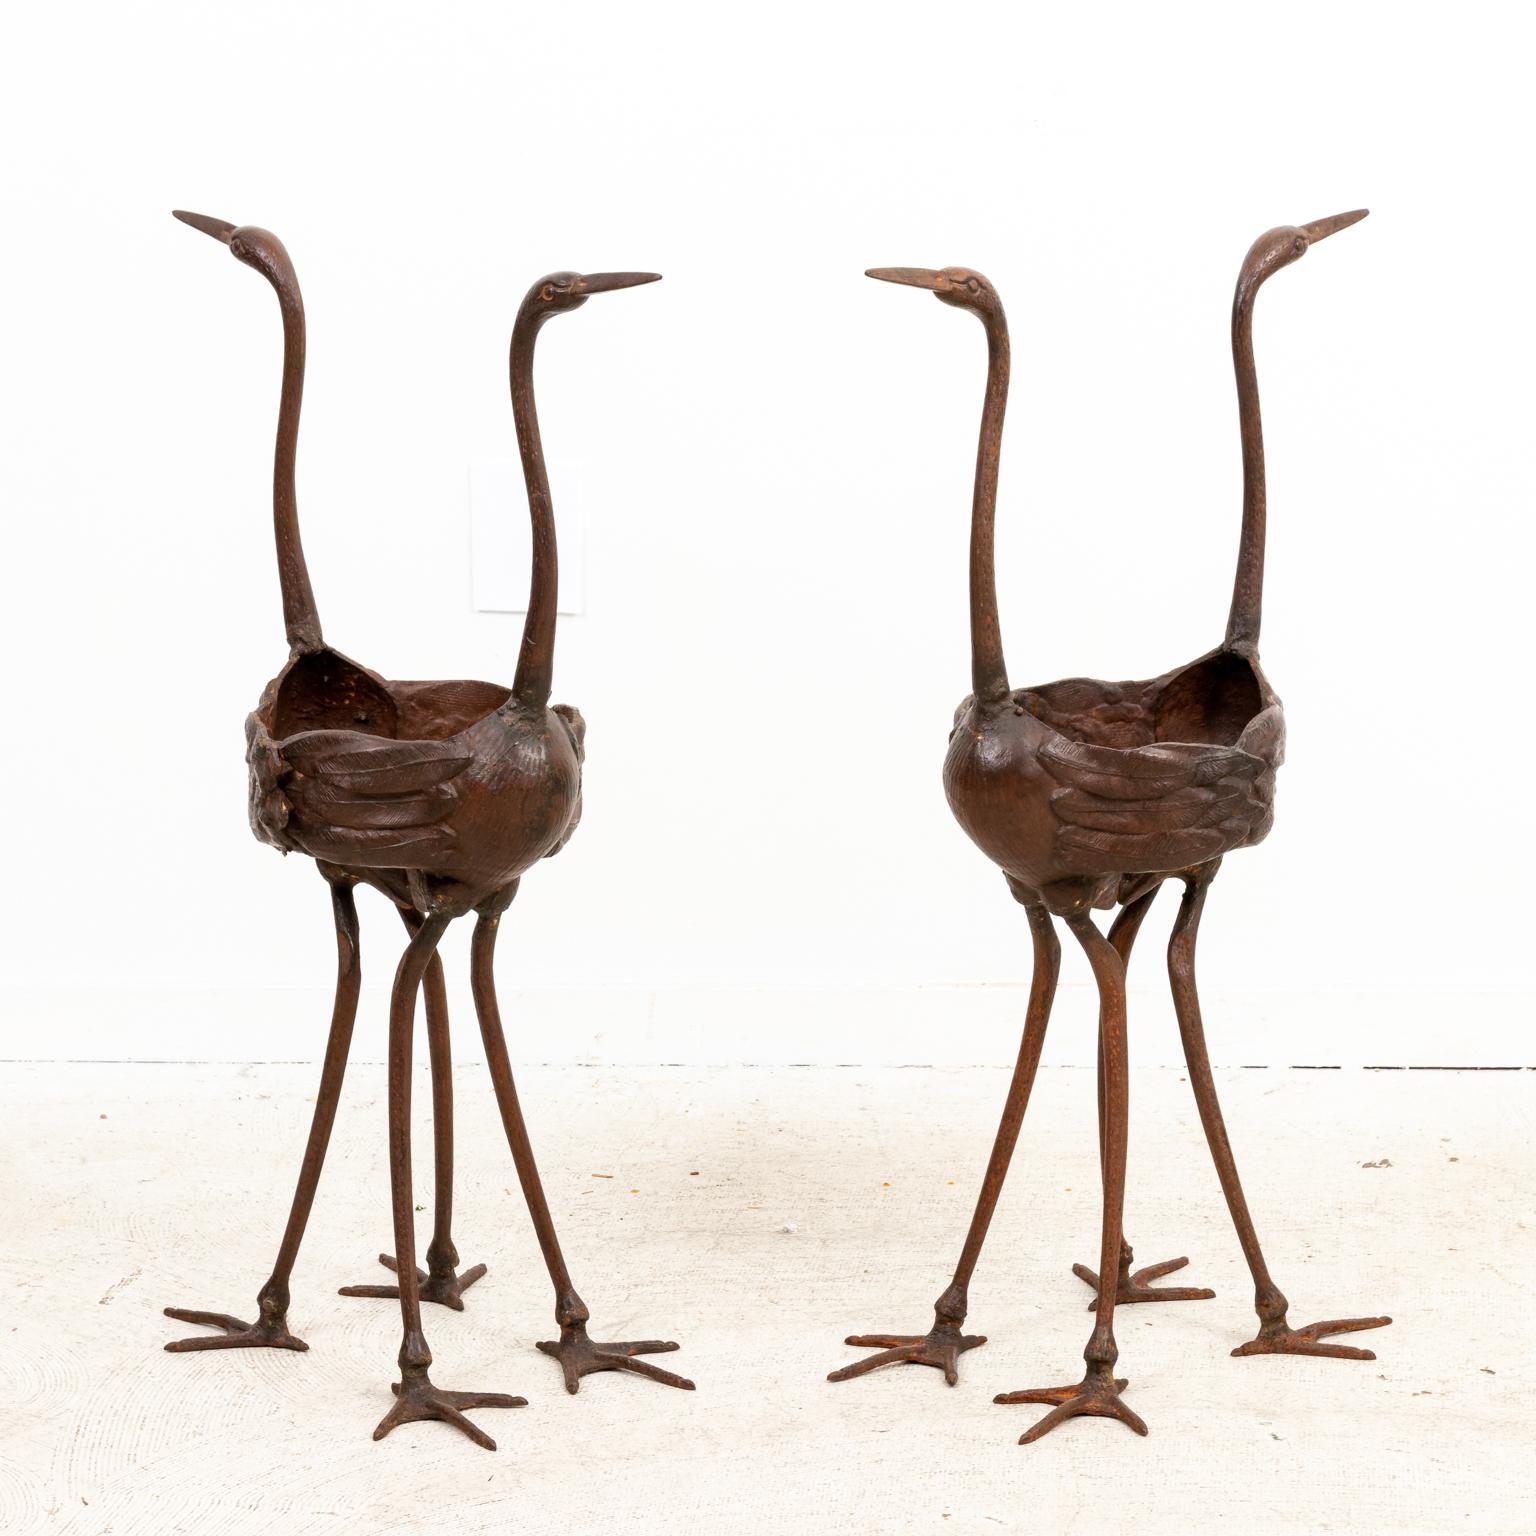 Circa 2012 contemporary pair of Iron double crane garden jardinières for use as planters. Please note of wear consistent with age.